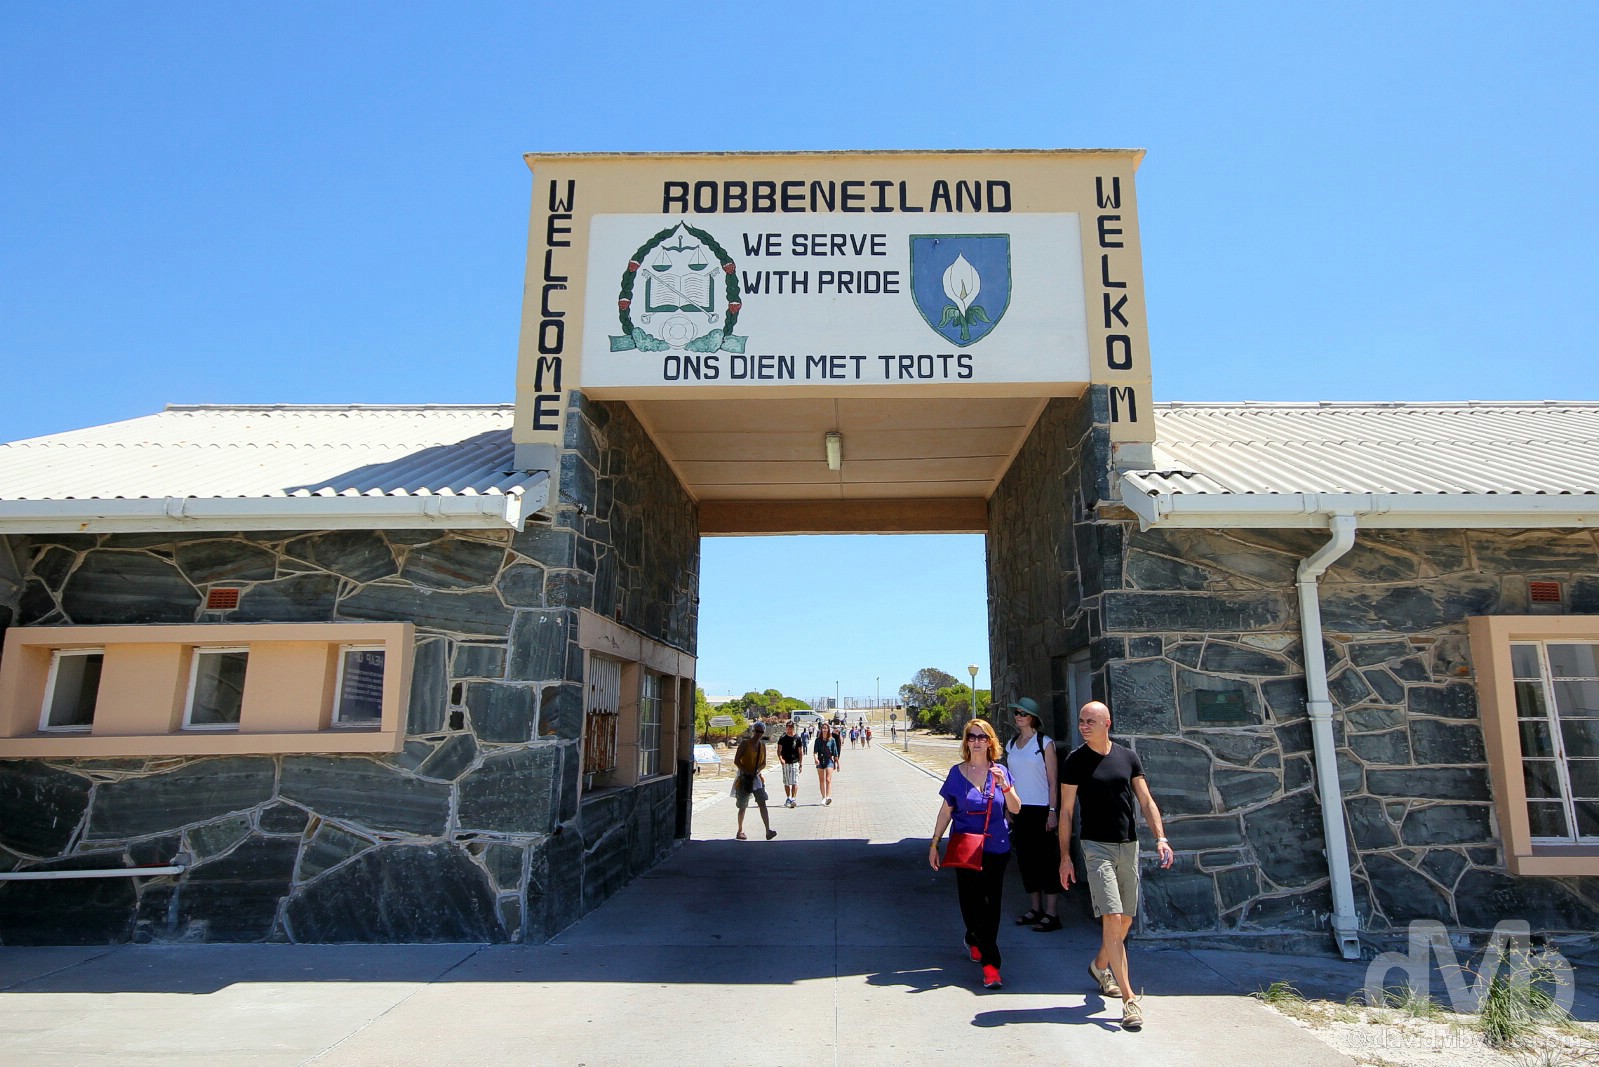 The entrance to Robben Island, Table Bay, Western Cape, South Africa. February 22, 2017.